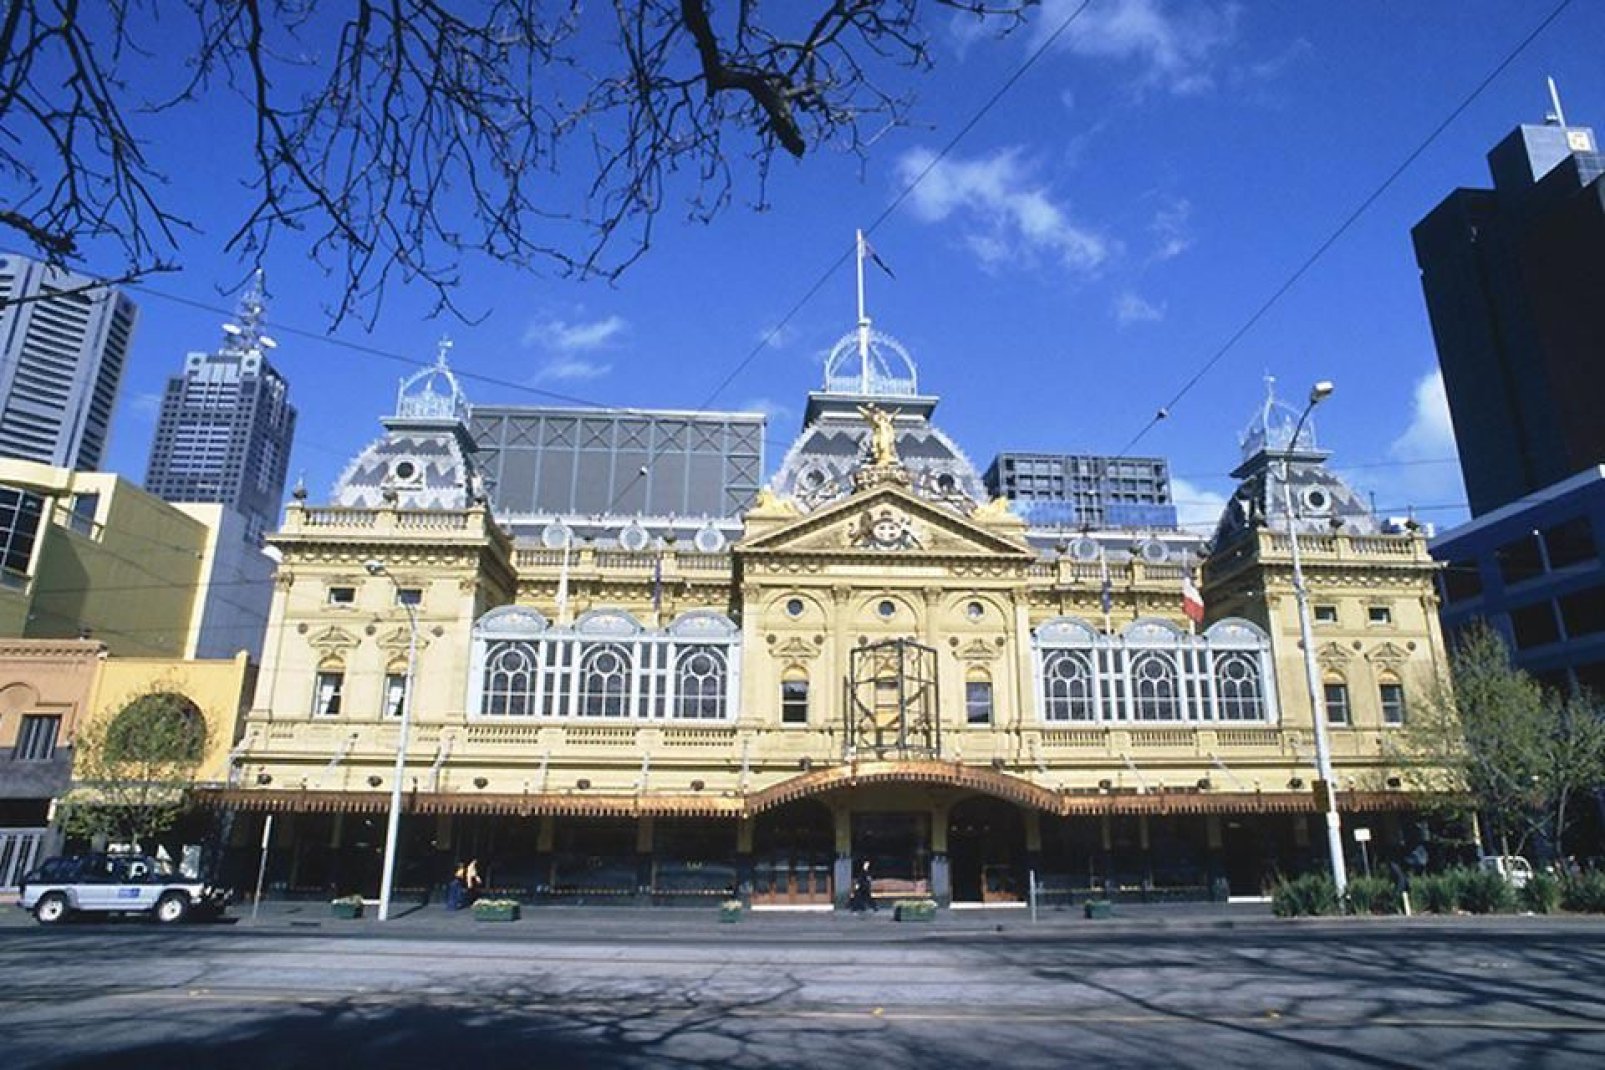 Melbourne is Australia's second biggest city after Sydney in terms of population.